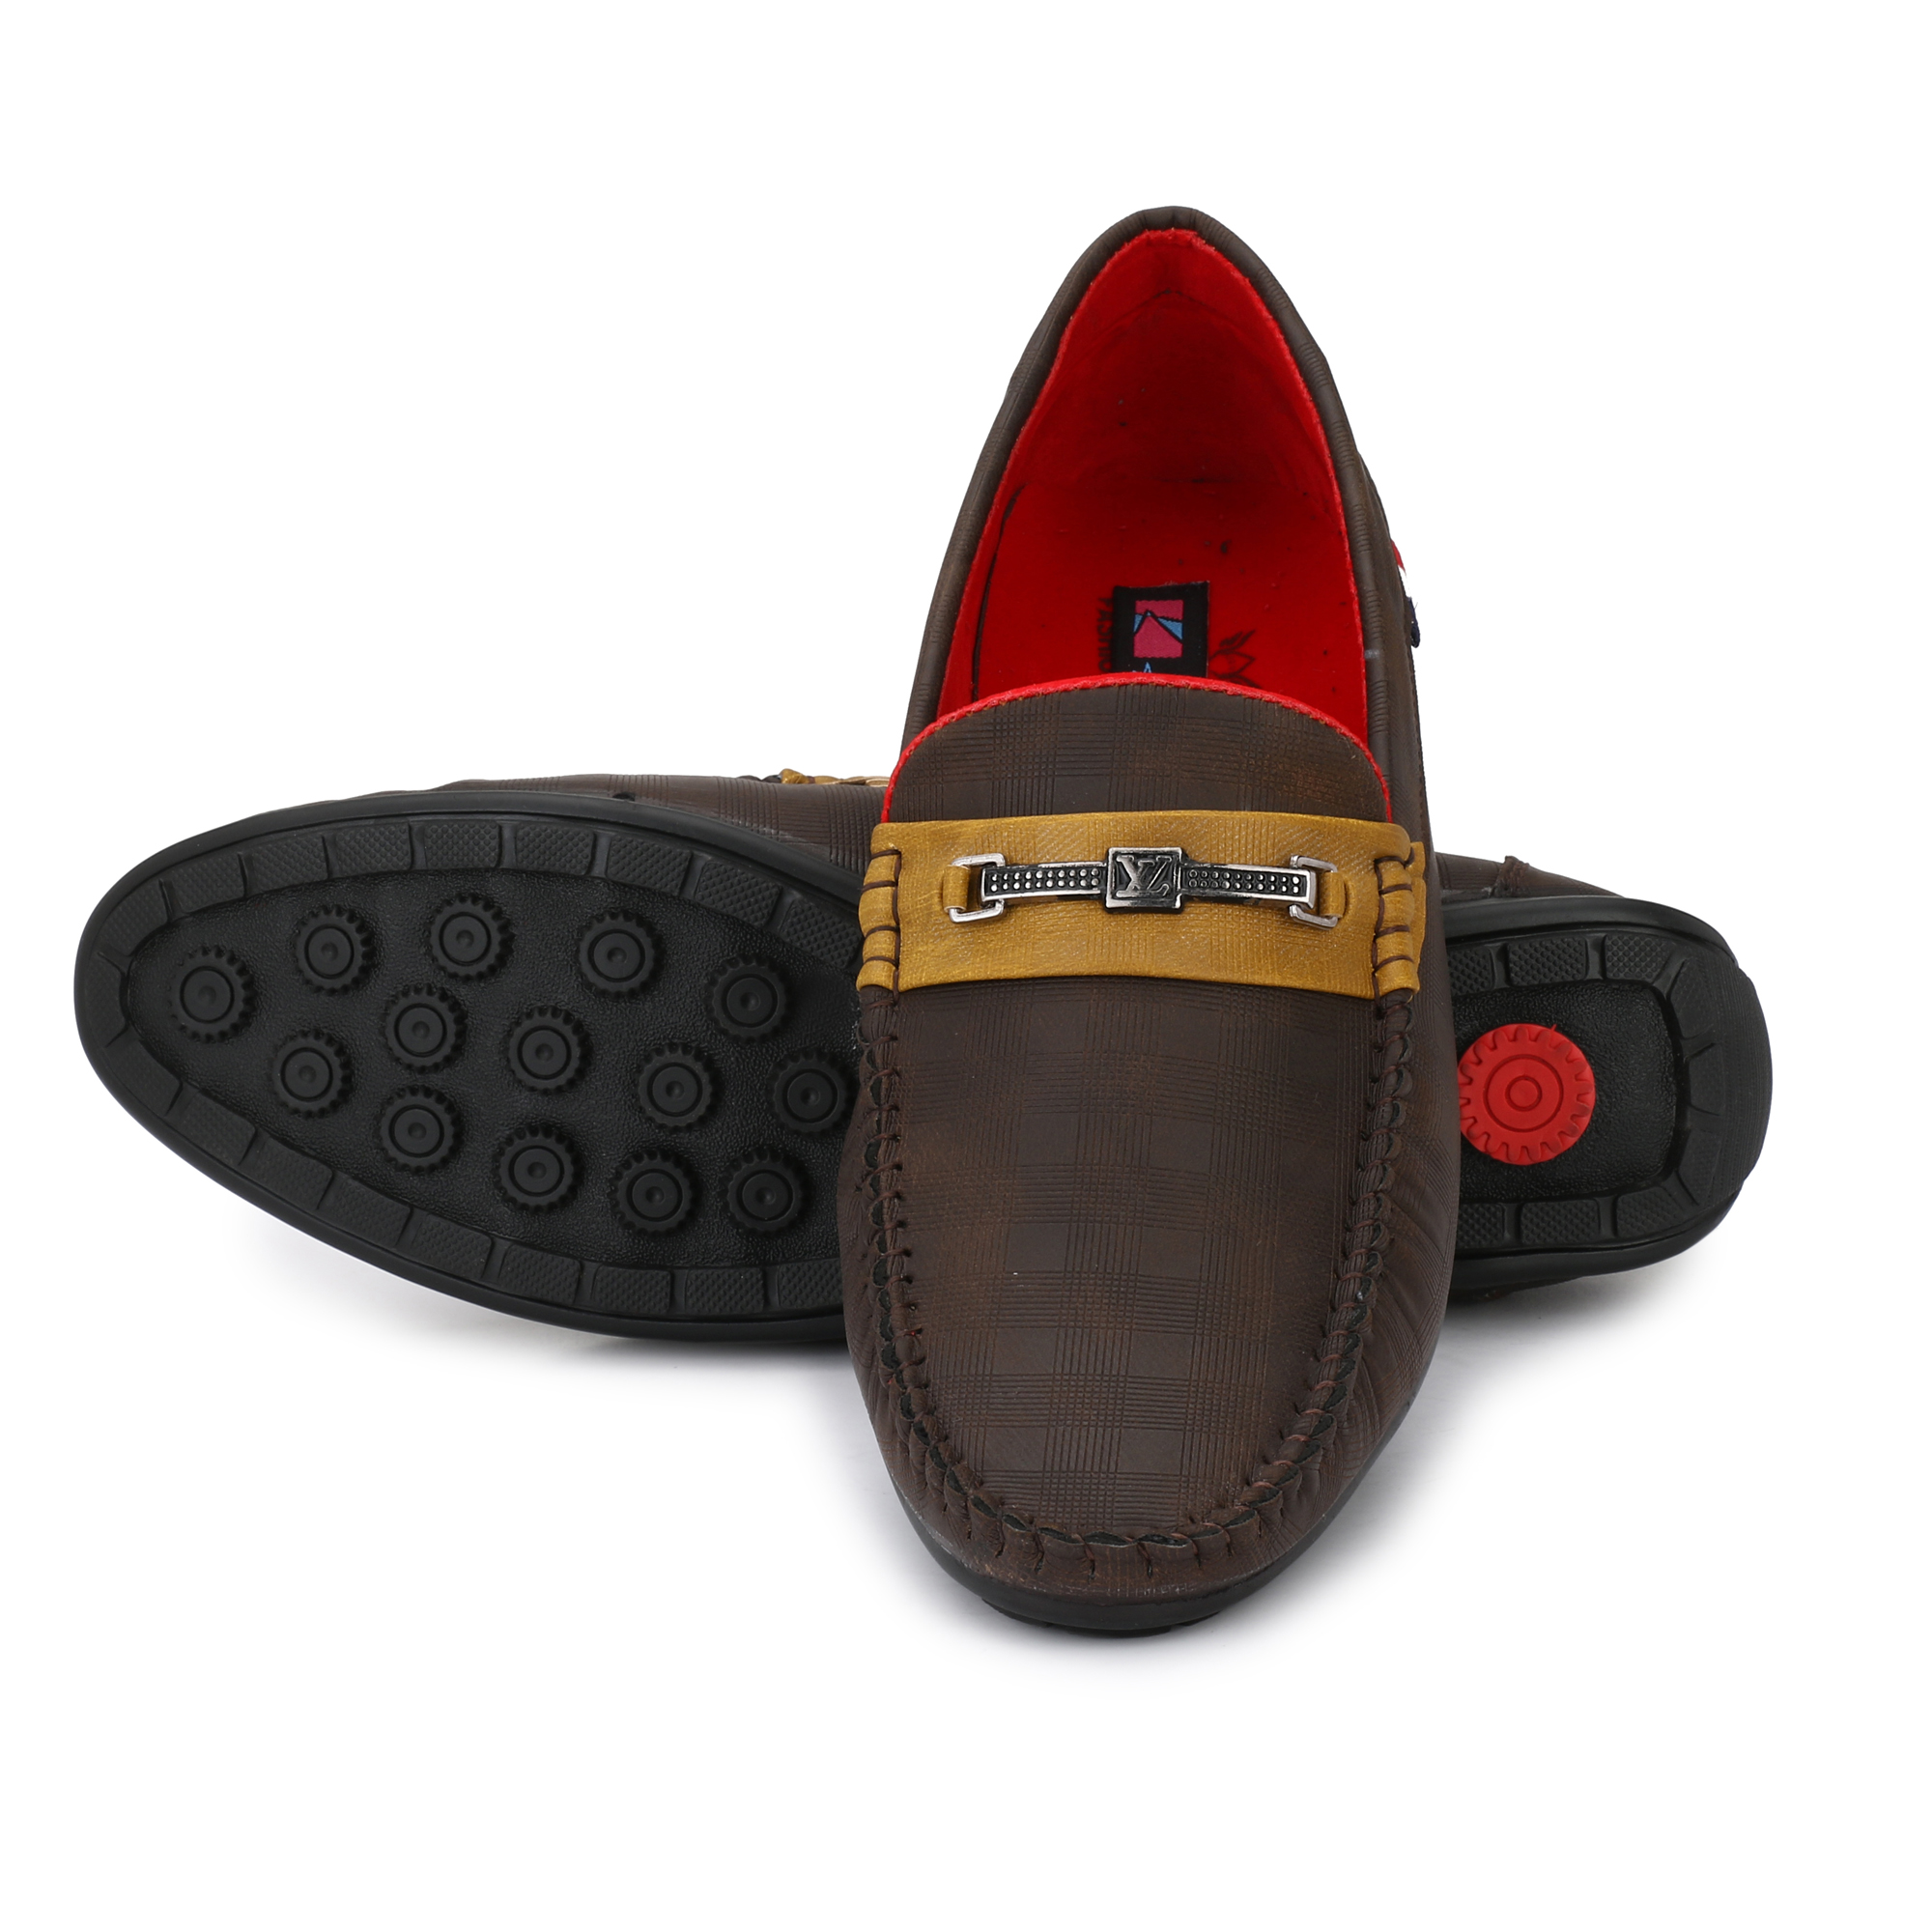 Buy Knoos Mens Brown Synthetic Leather Casual Loafer Online ₹589 From Shopclues 9525